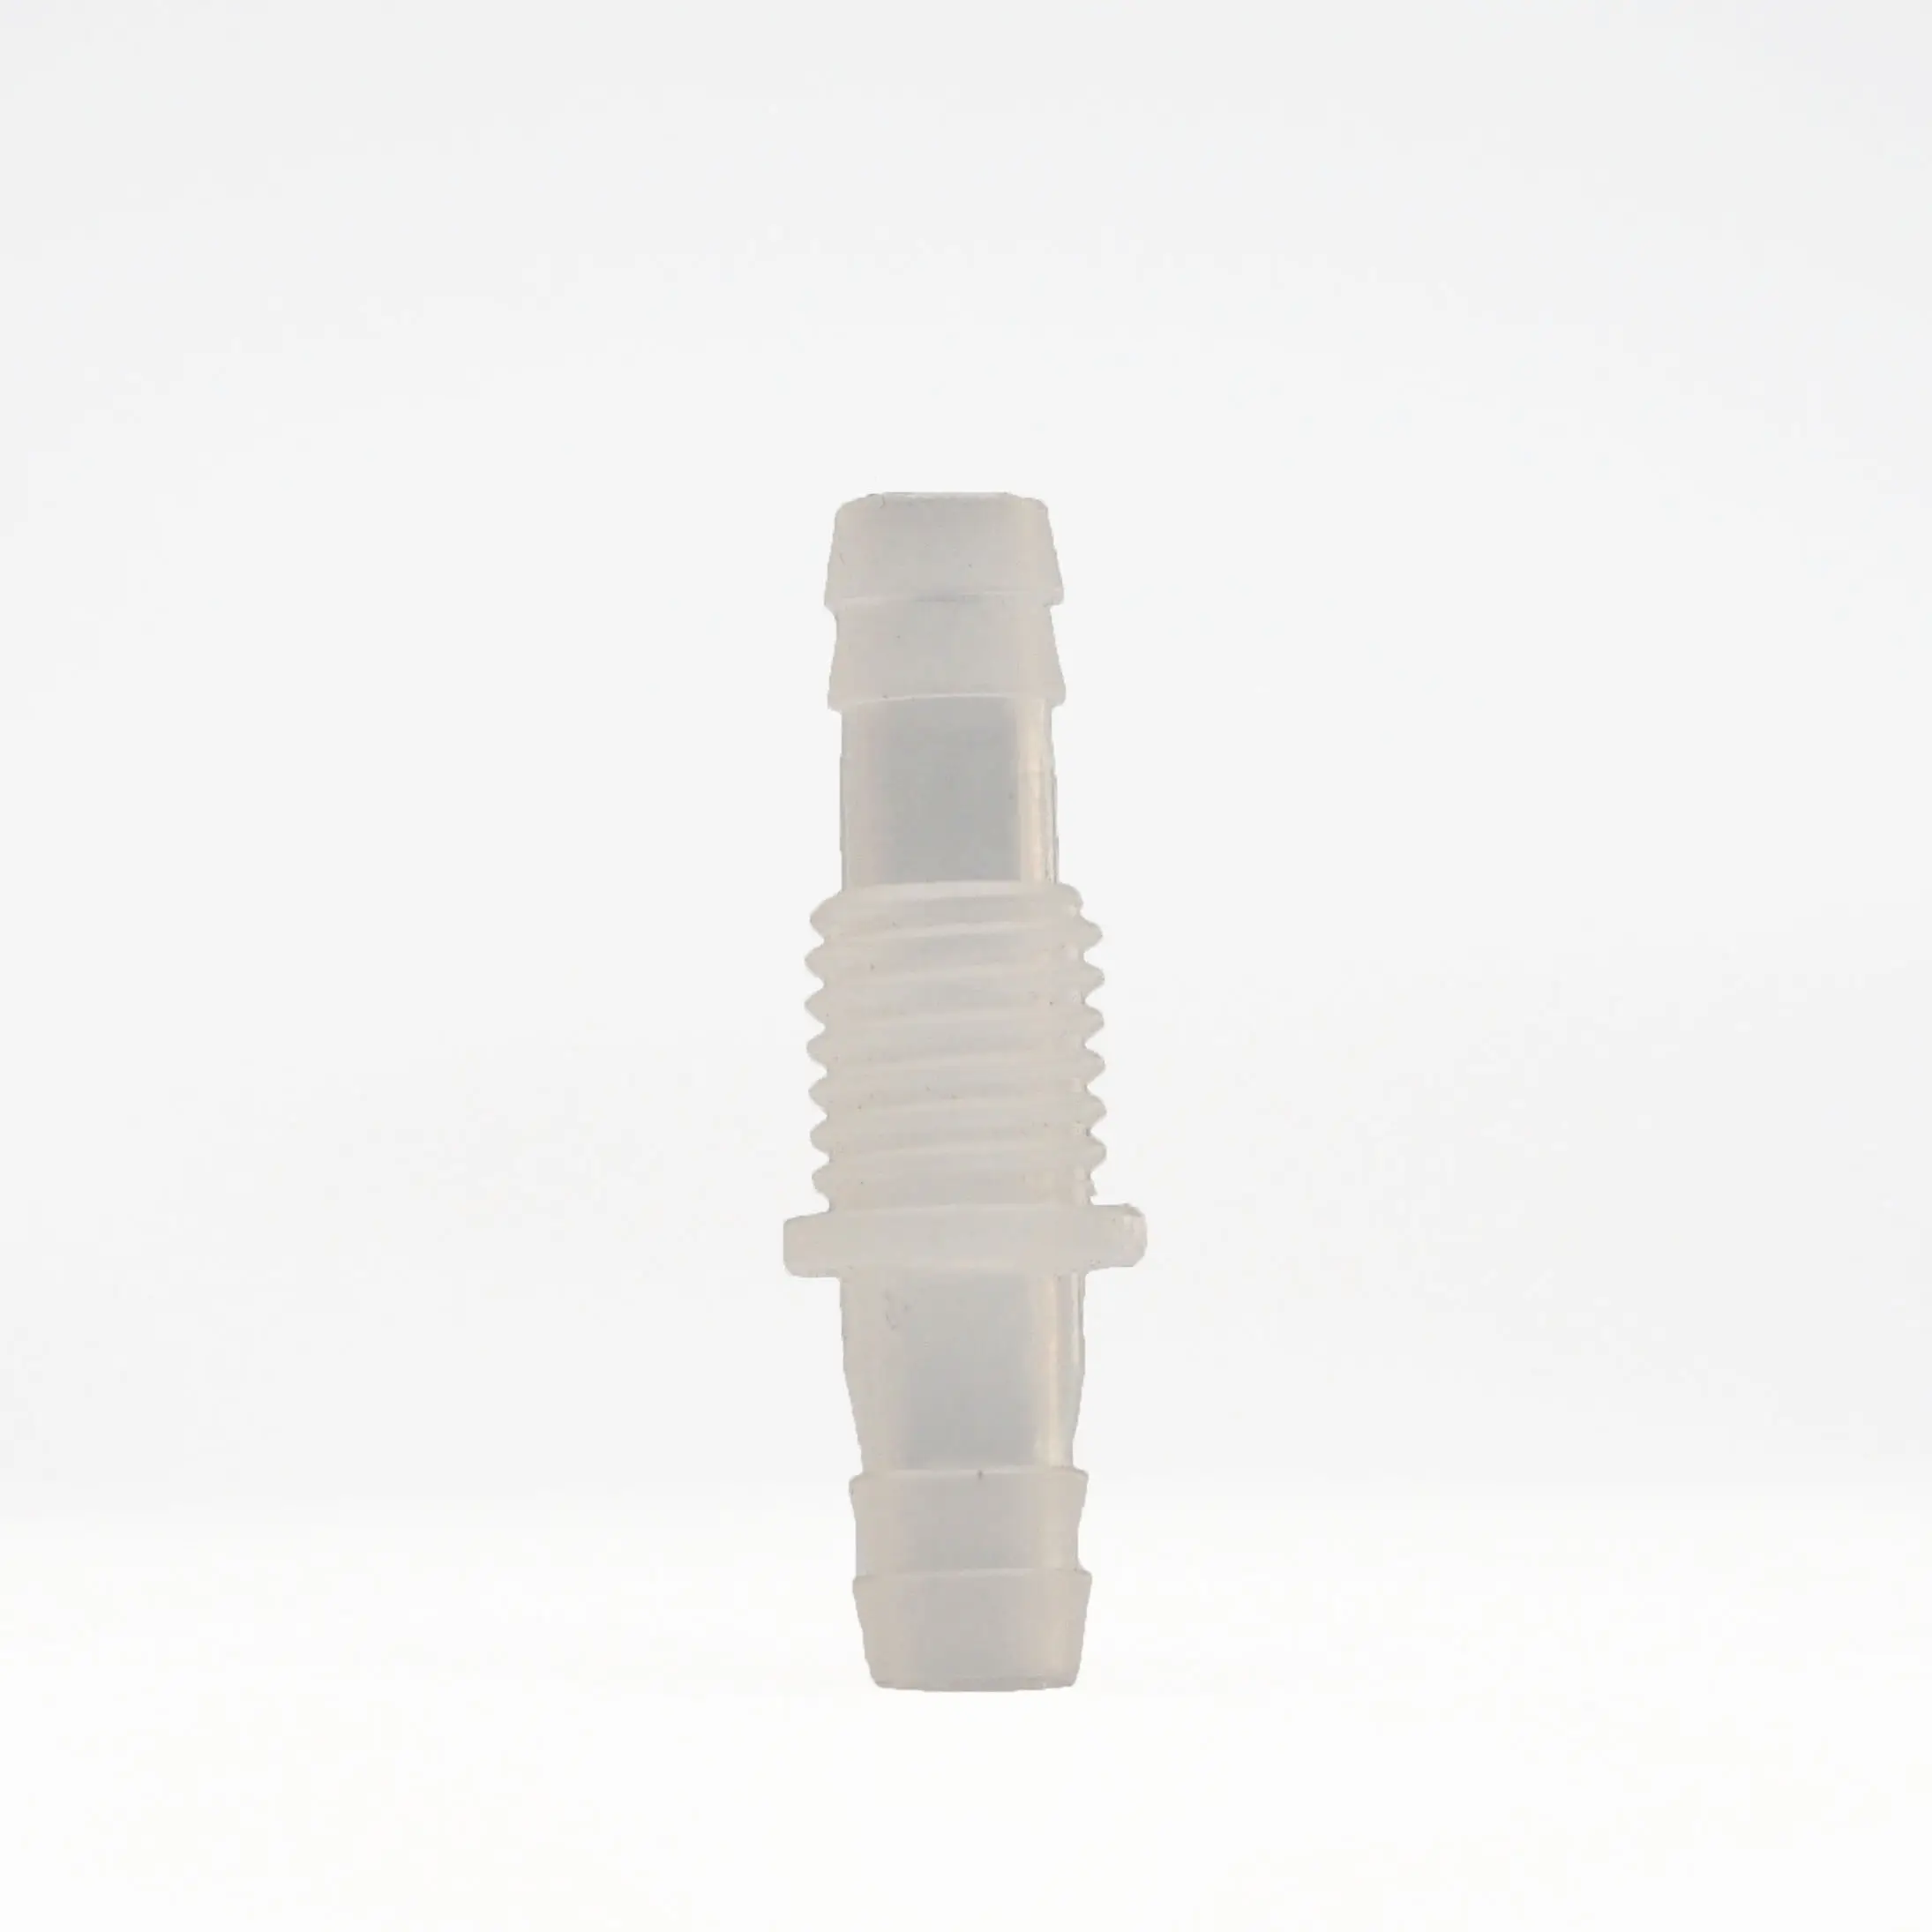 MJ-8-M12-8 Barb 8mm Middle OD: M12 water pipe connect joint